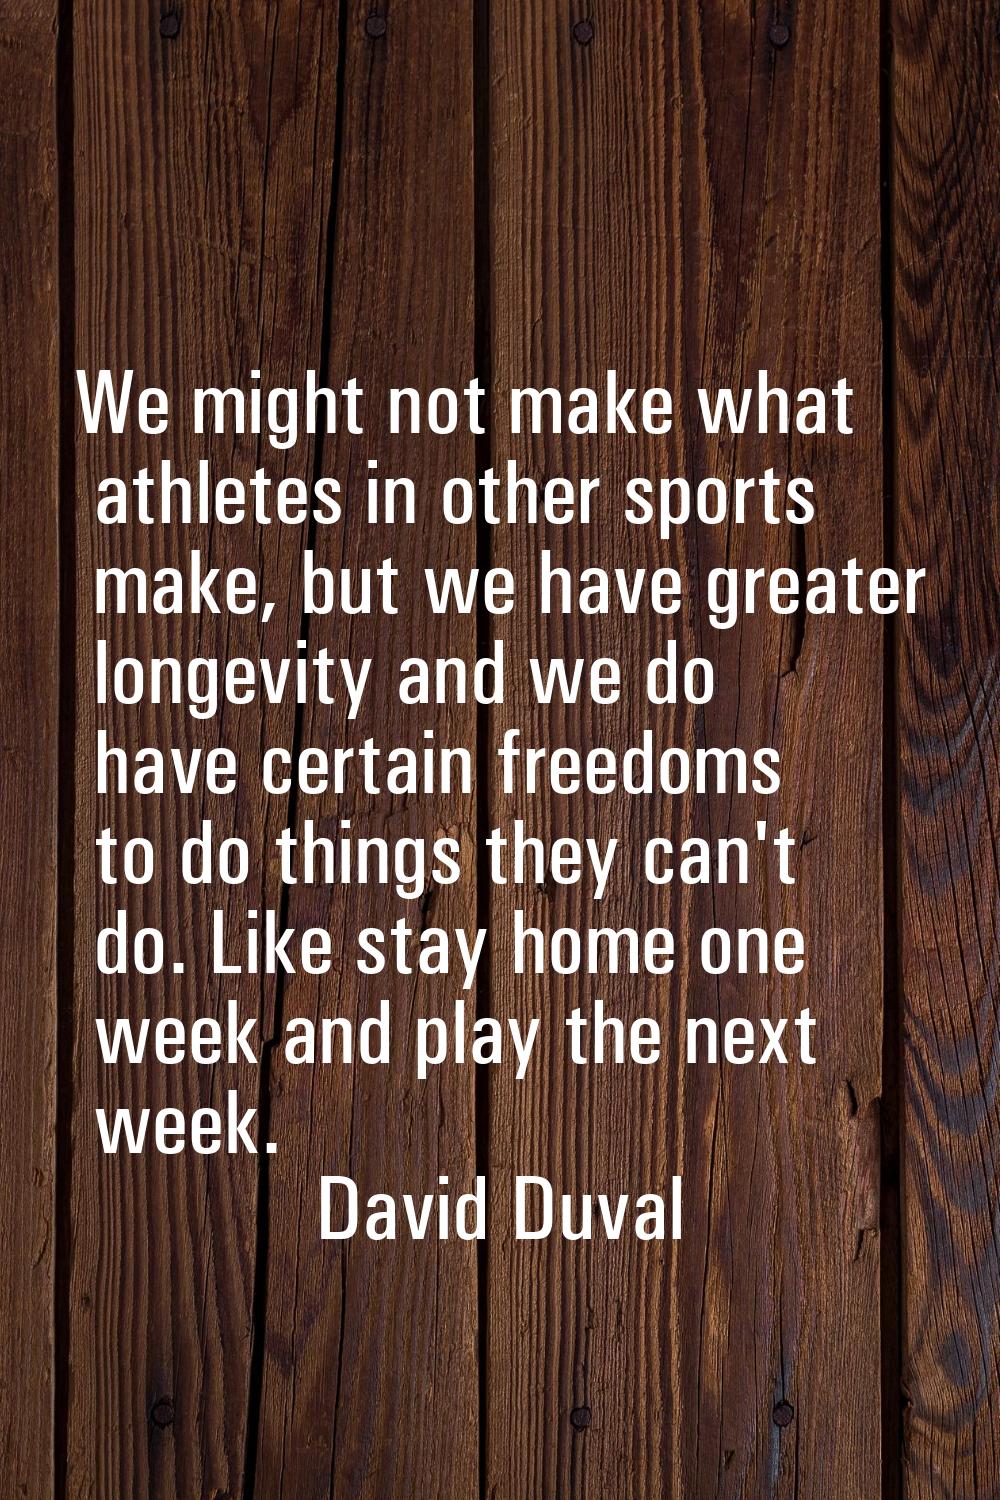 We might not make what athletes in other sports make, but we have greater longevity and we do have 